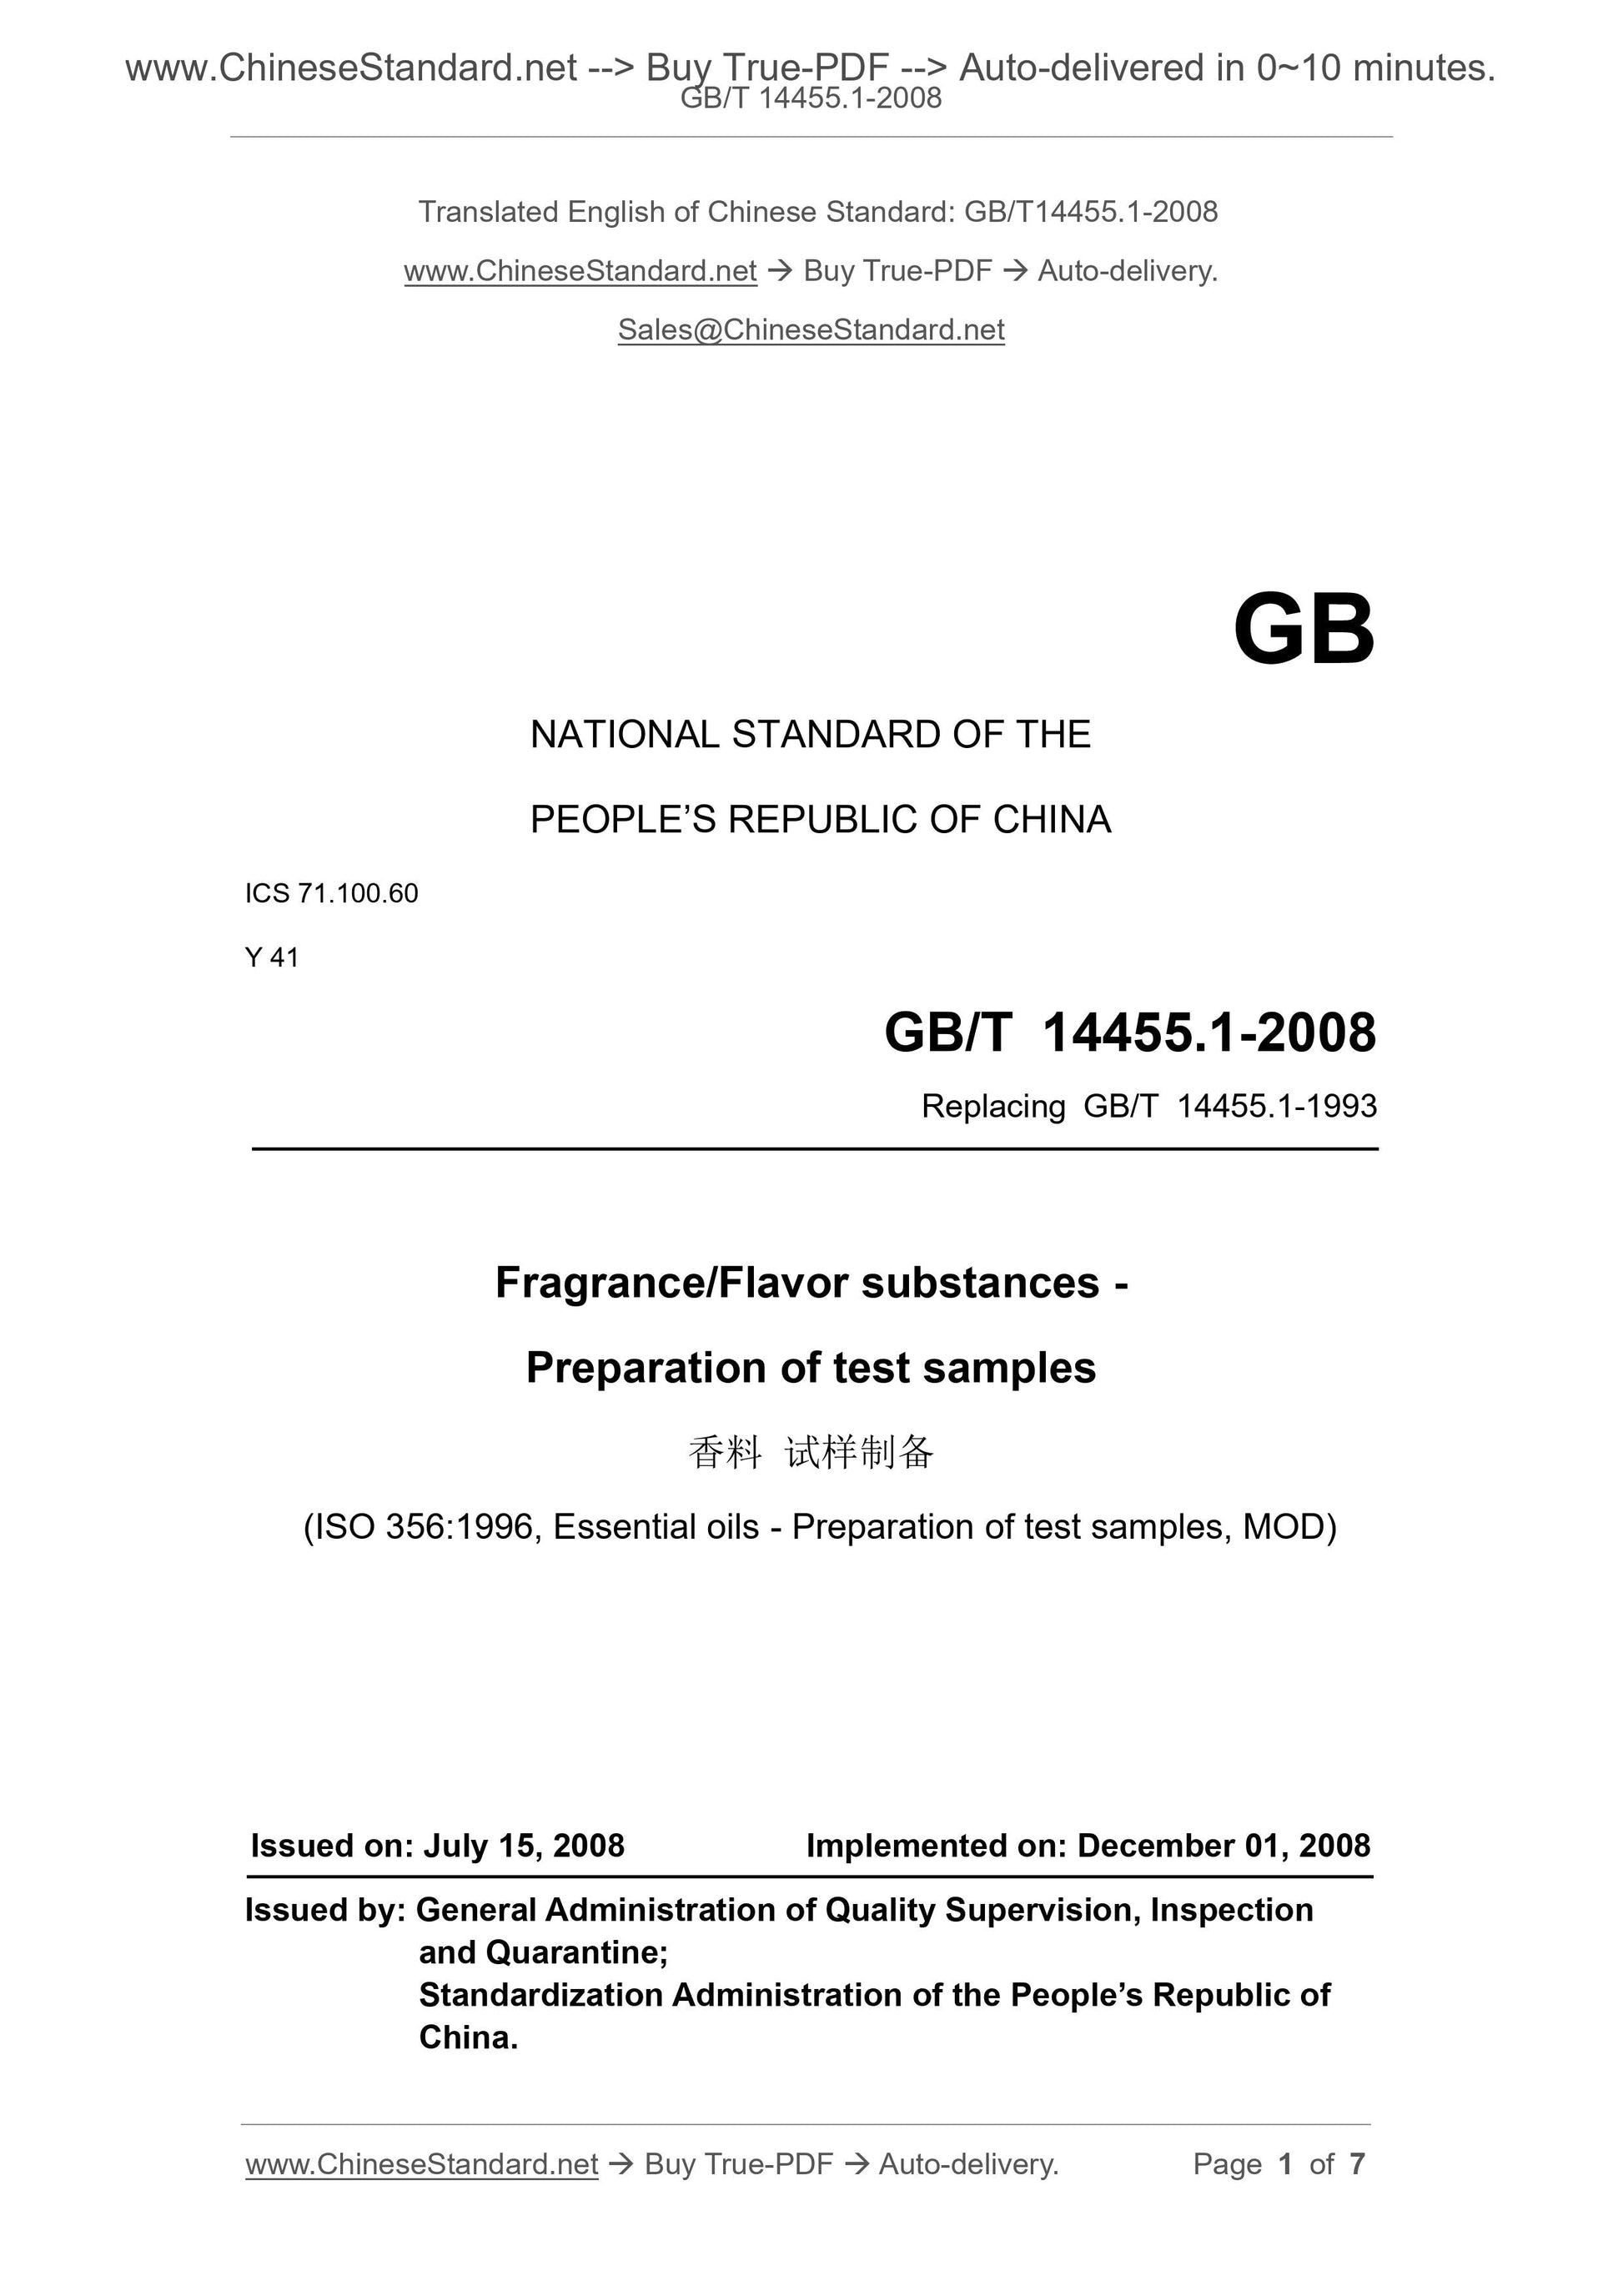 GB/T 14454.1-2008 Page 1